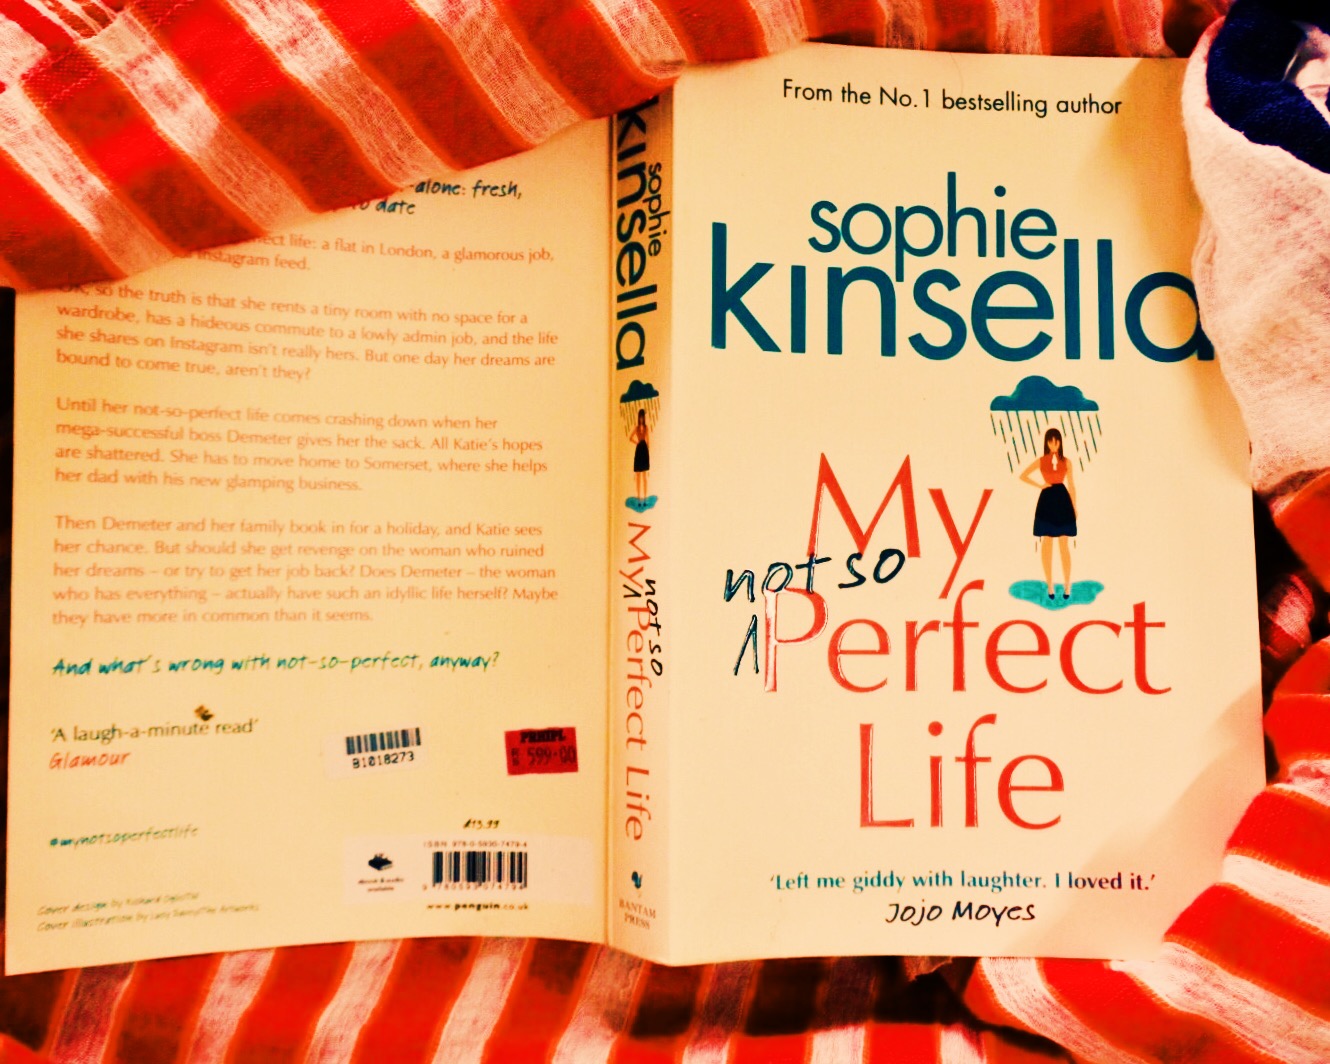 My not so perfect life by Sophie Kinsella